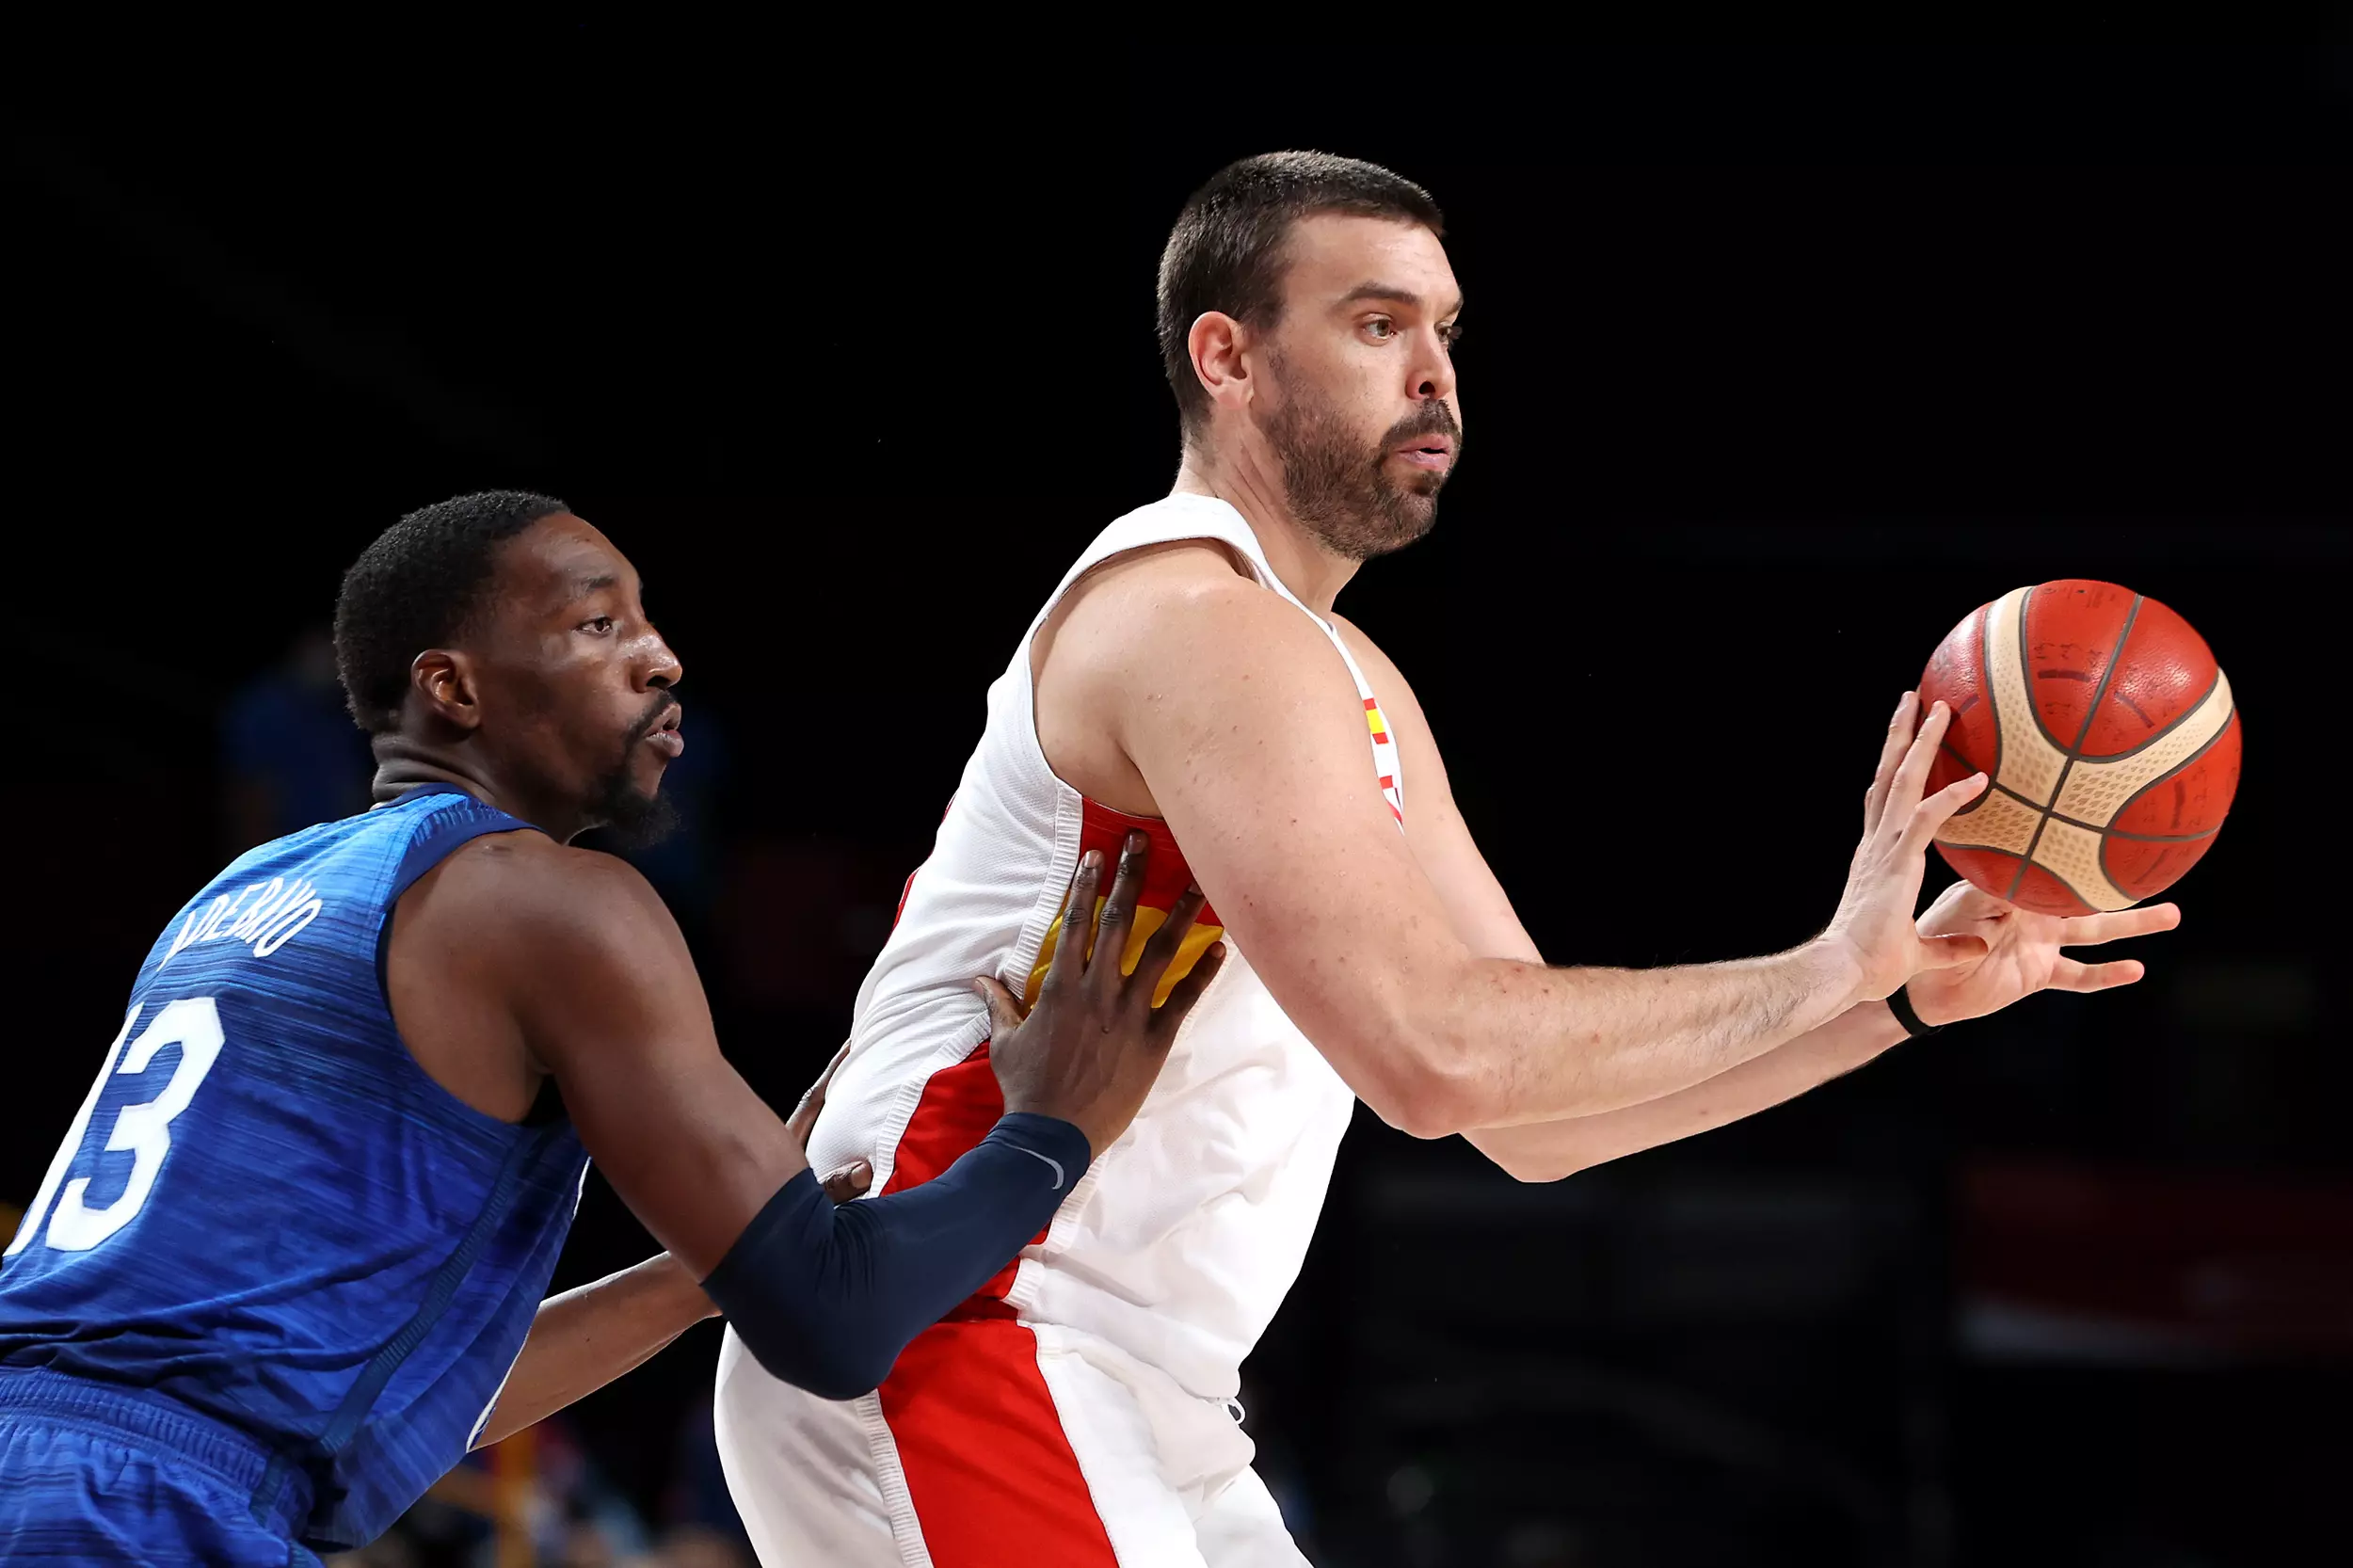 Marc Gasol Is Reportedly Leaving the NBA to Play in Spain